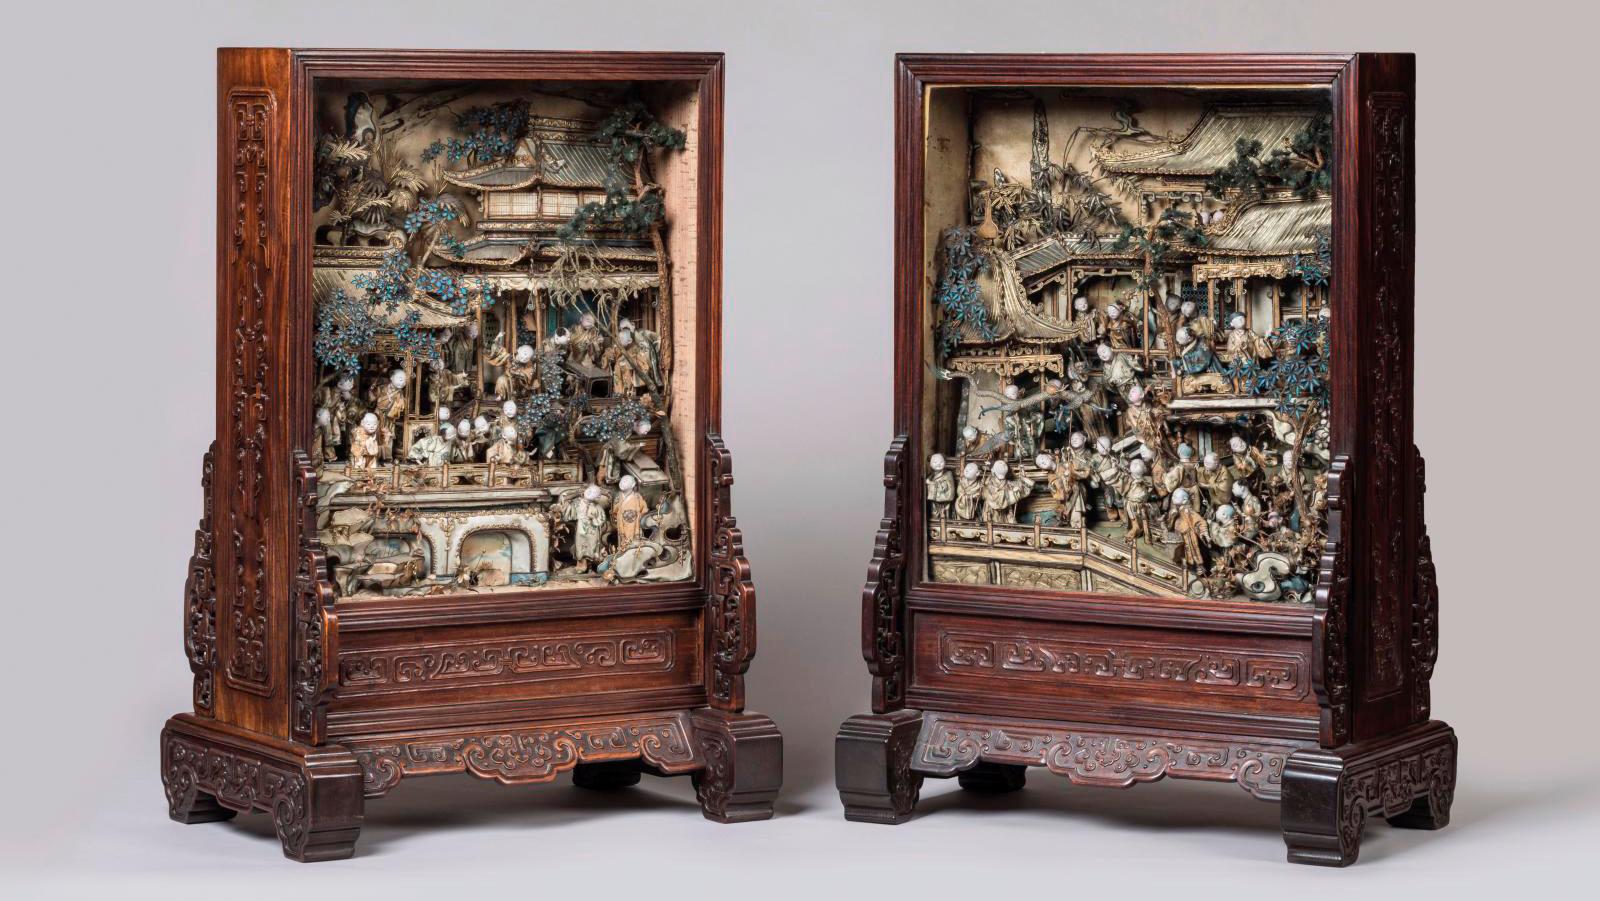 China, Canton, late 18th century, pair of dioramas in polychrome silk with appliqué... Art Comes to Life in Two Chinese Dioramas